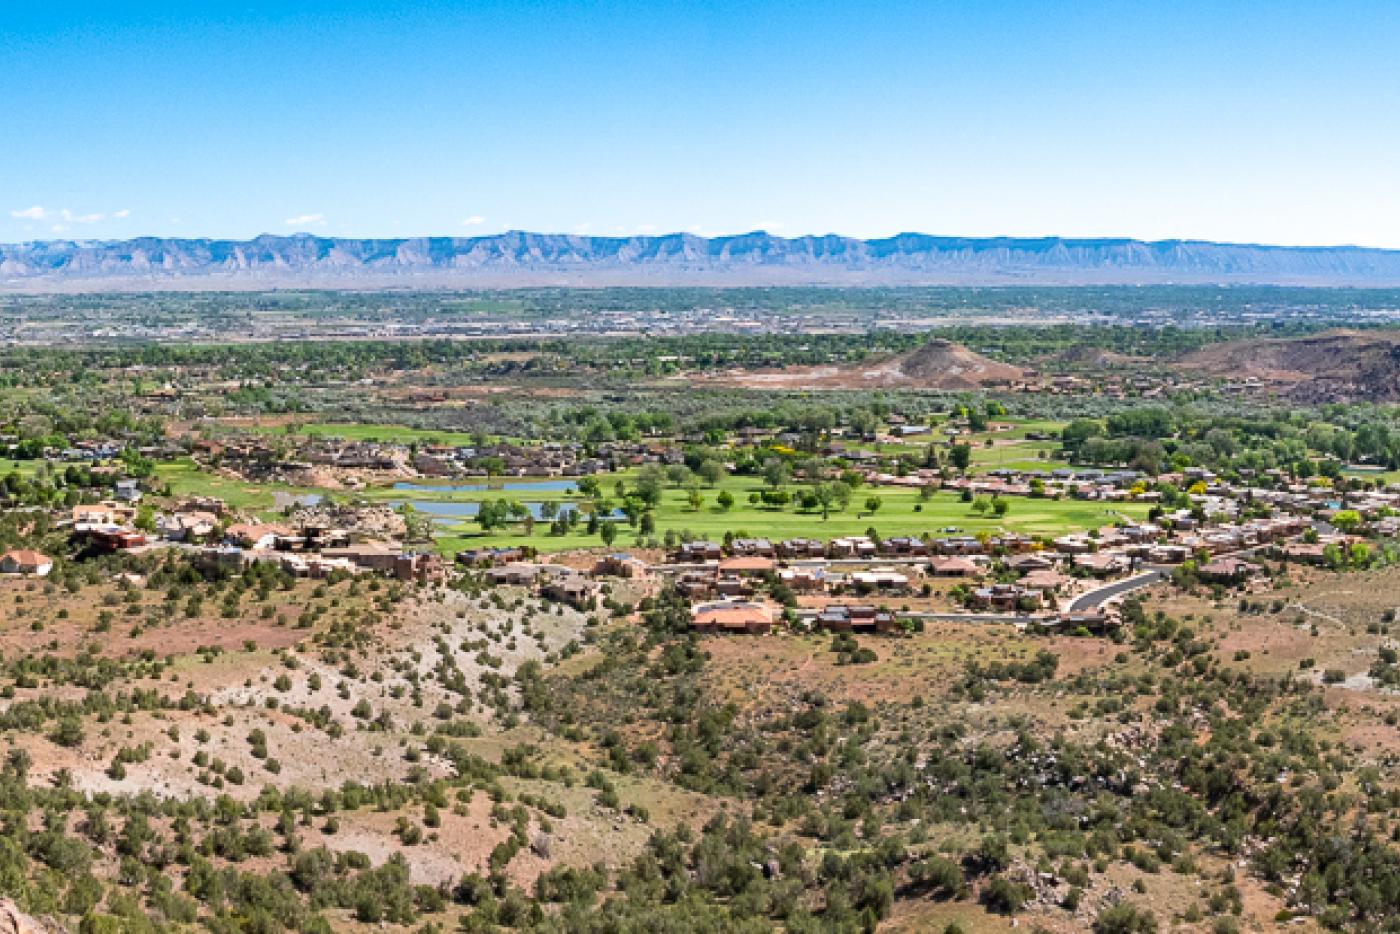 Panorama of Seasons Subdivision from above